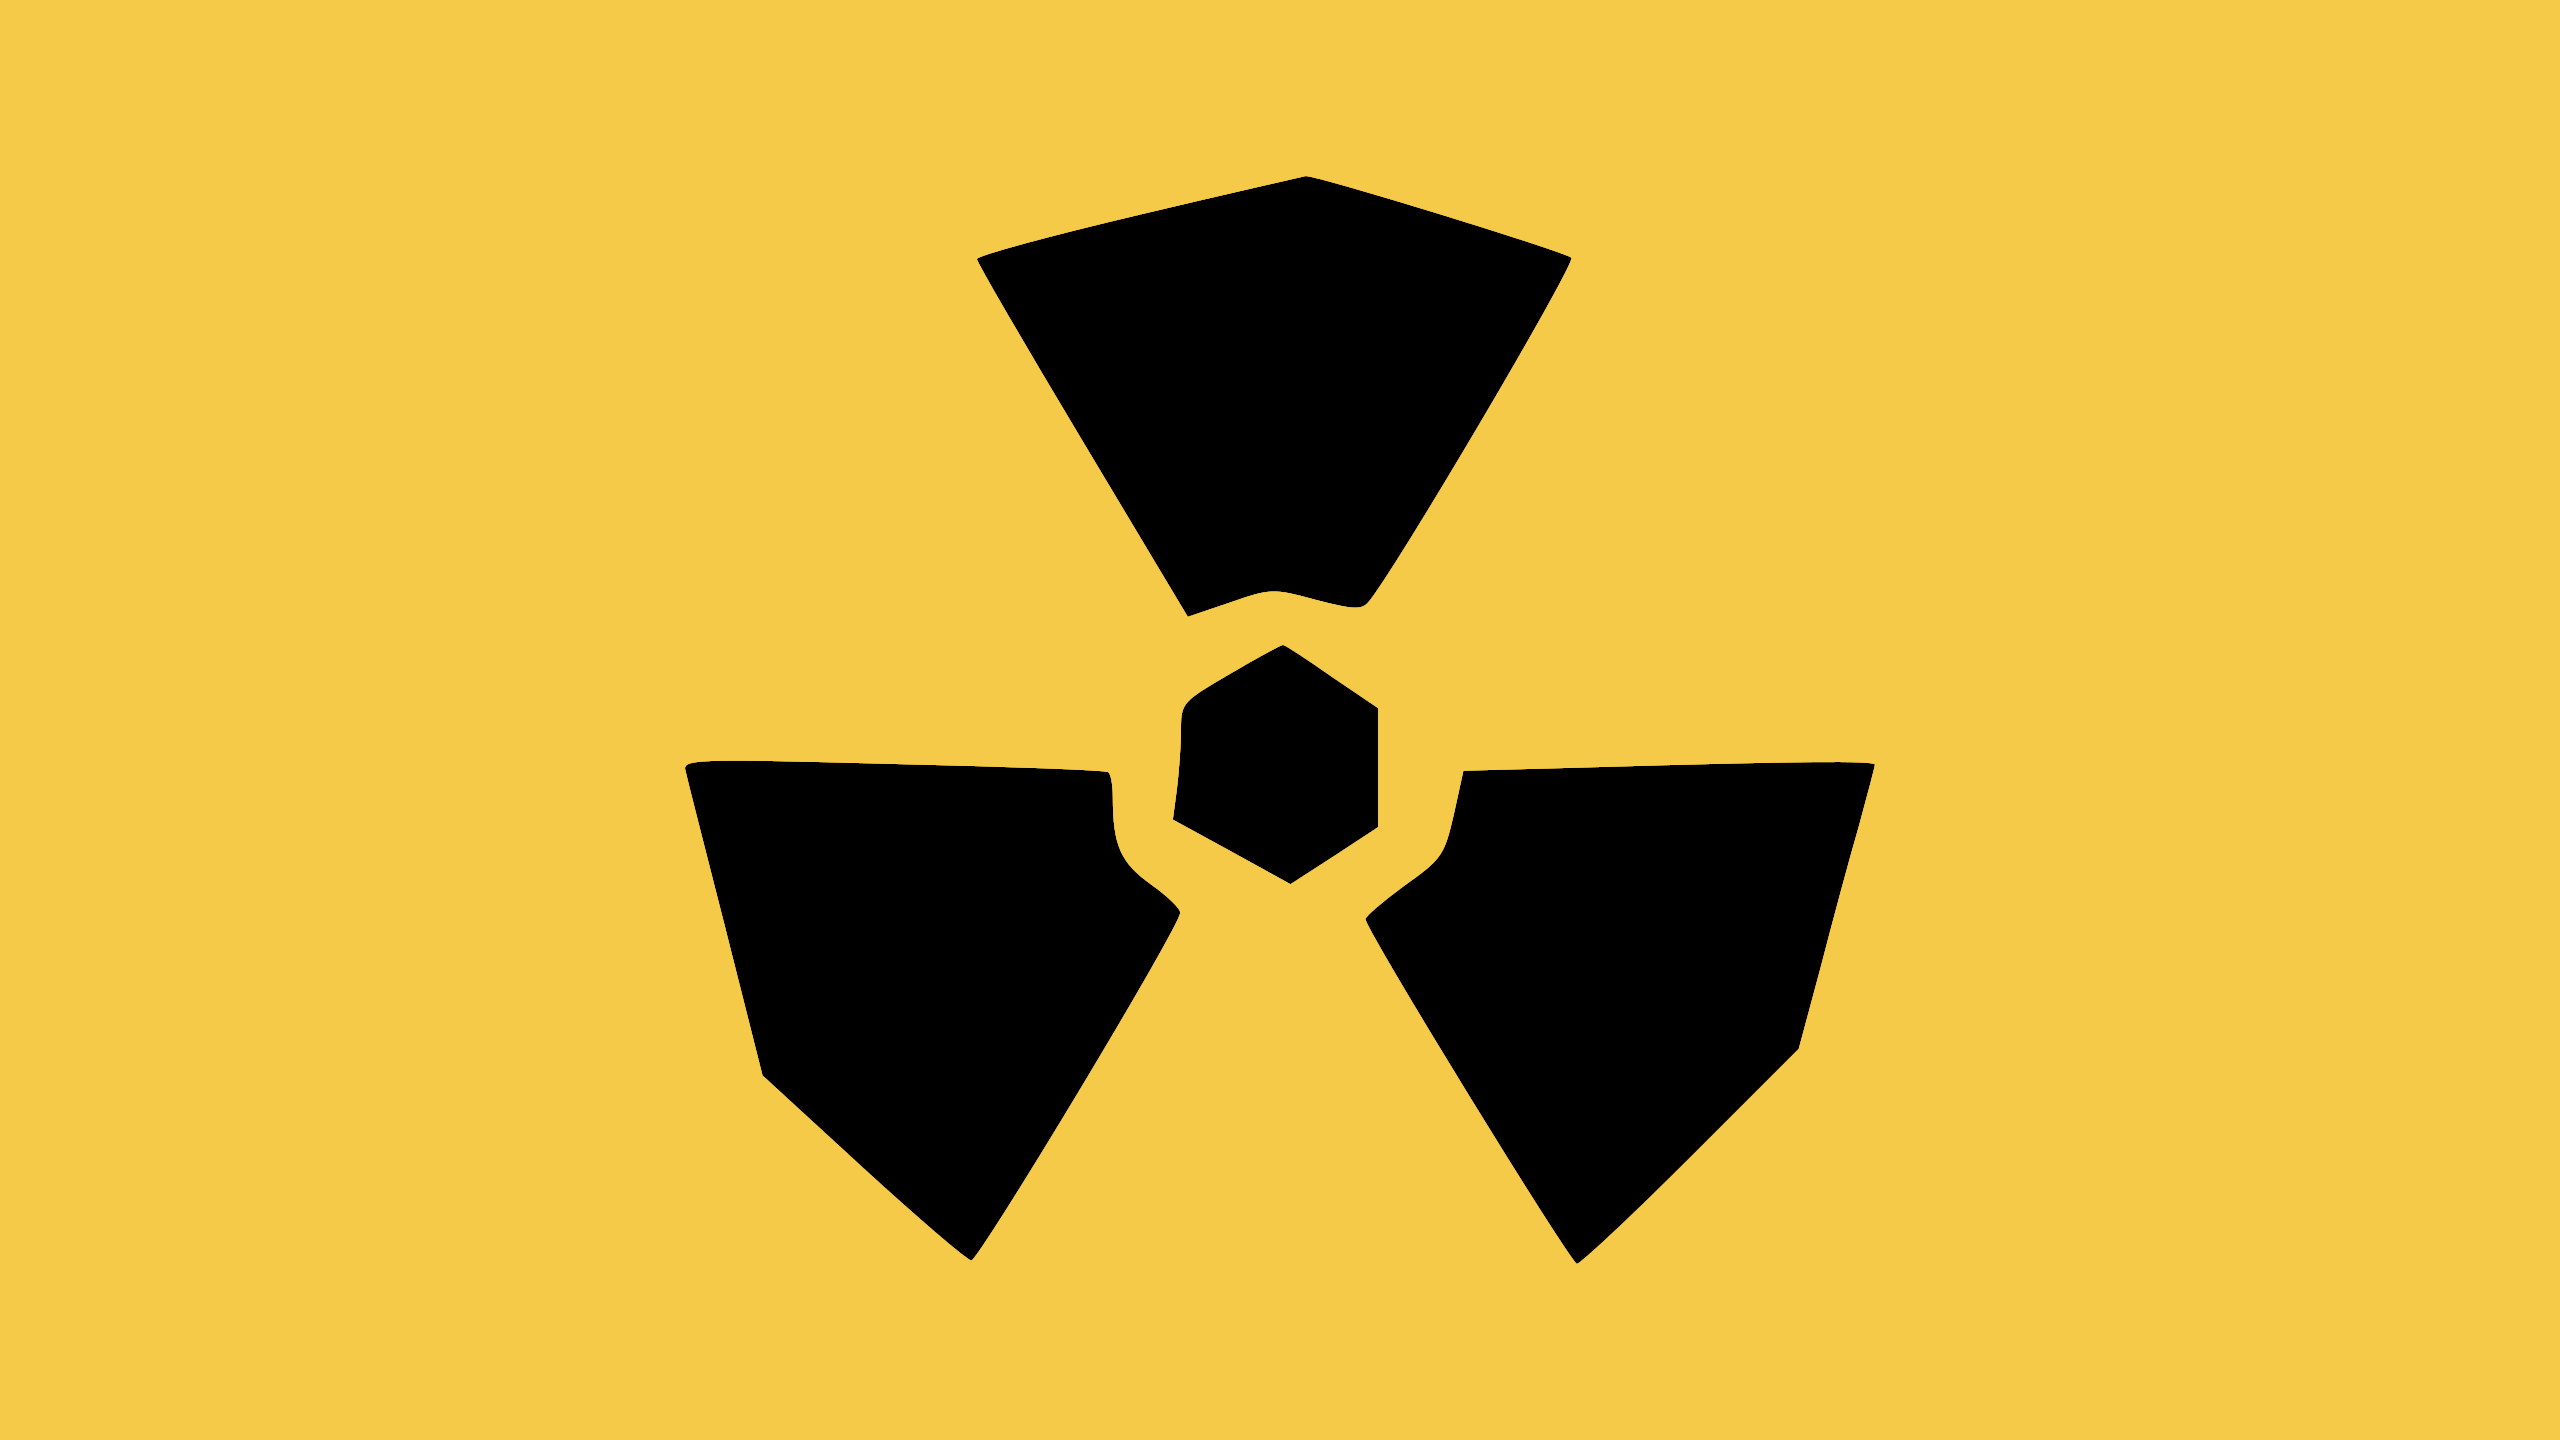 General 2560x1440 nuclear signs radioactive simple background yellow yellow background